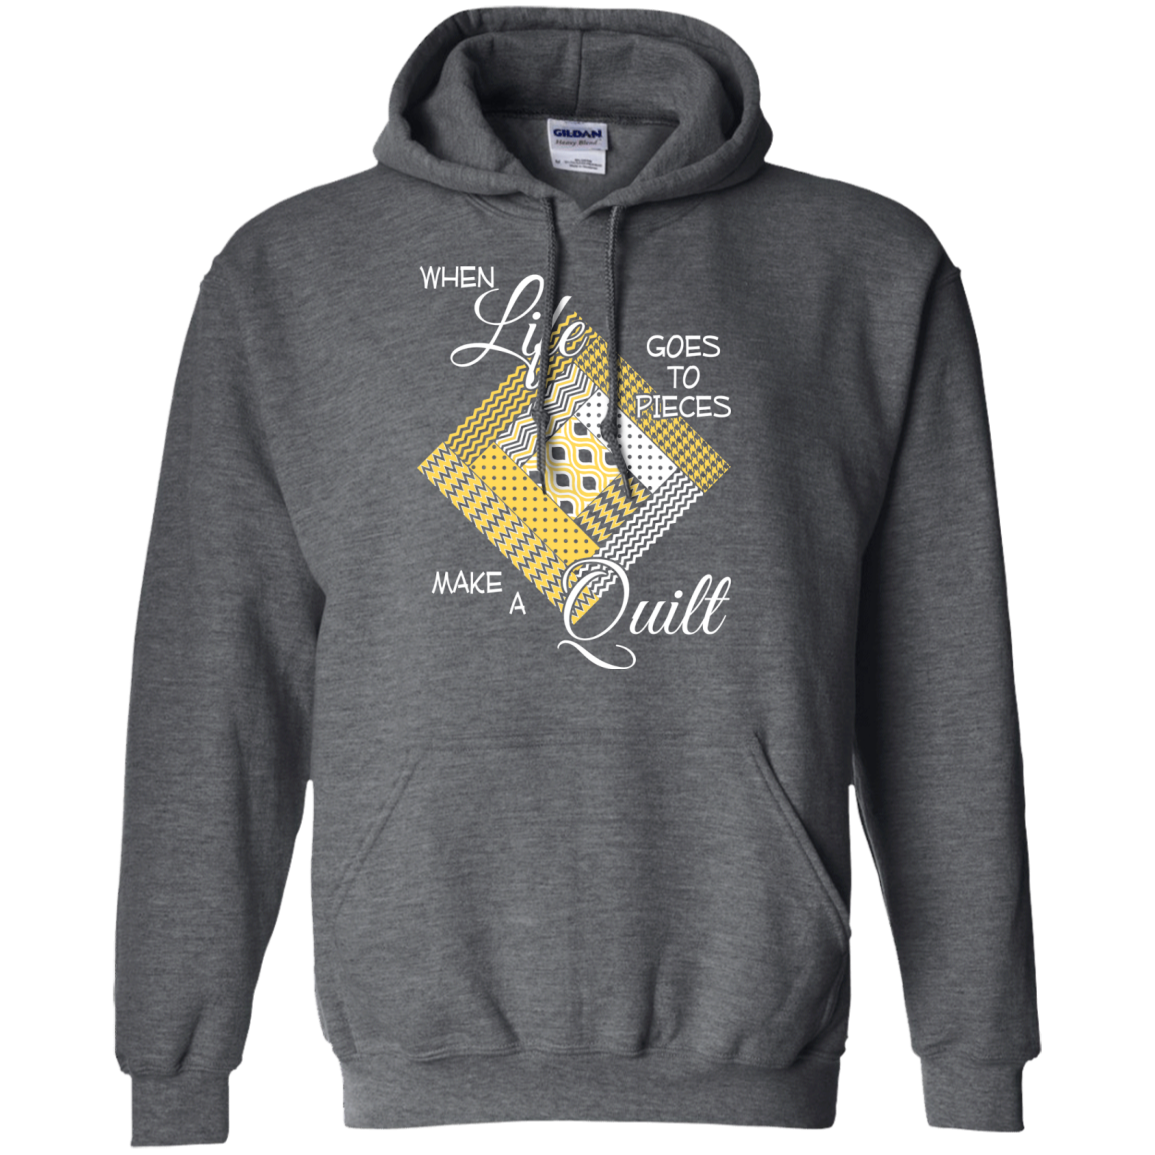 Make a Quilt (yellow) Pullover Hoodies - Crafter4Life - 3